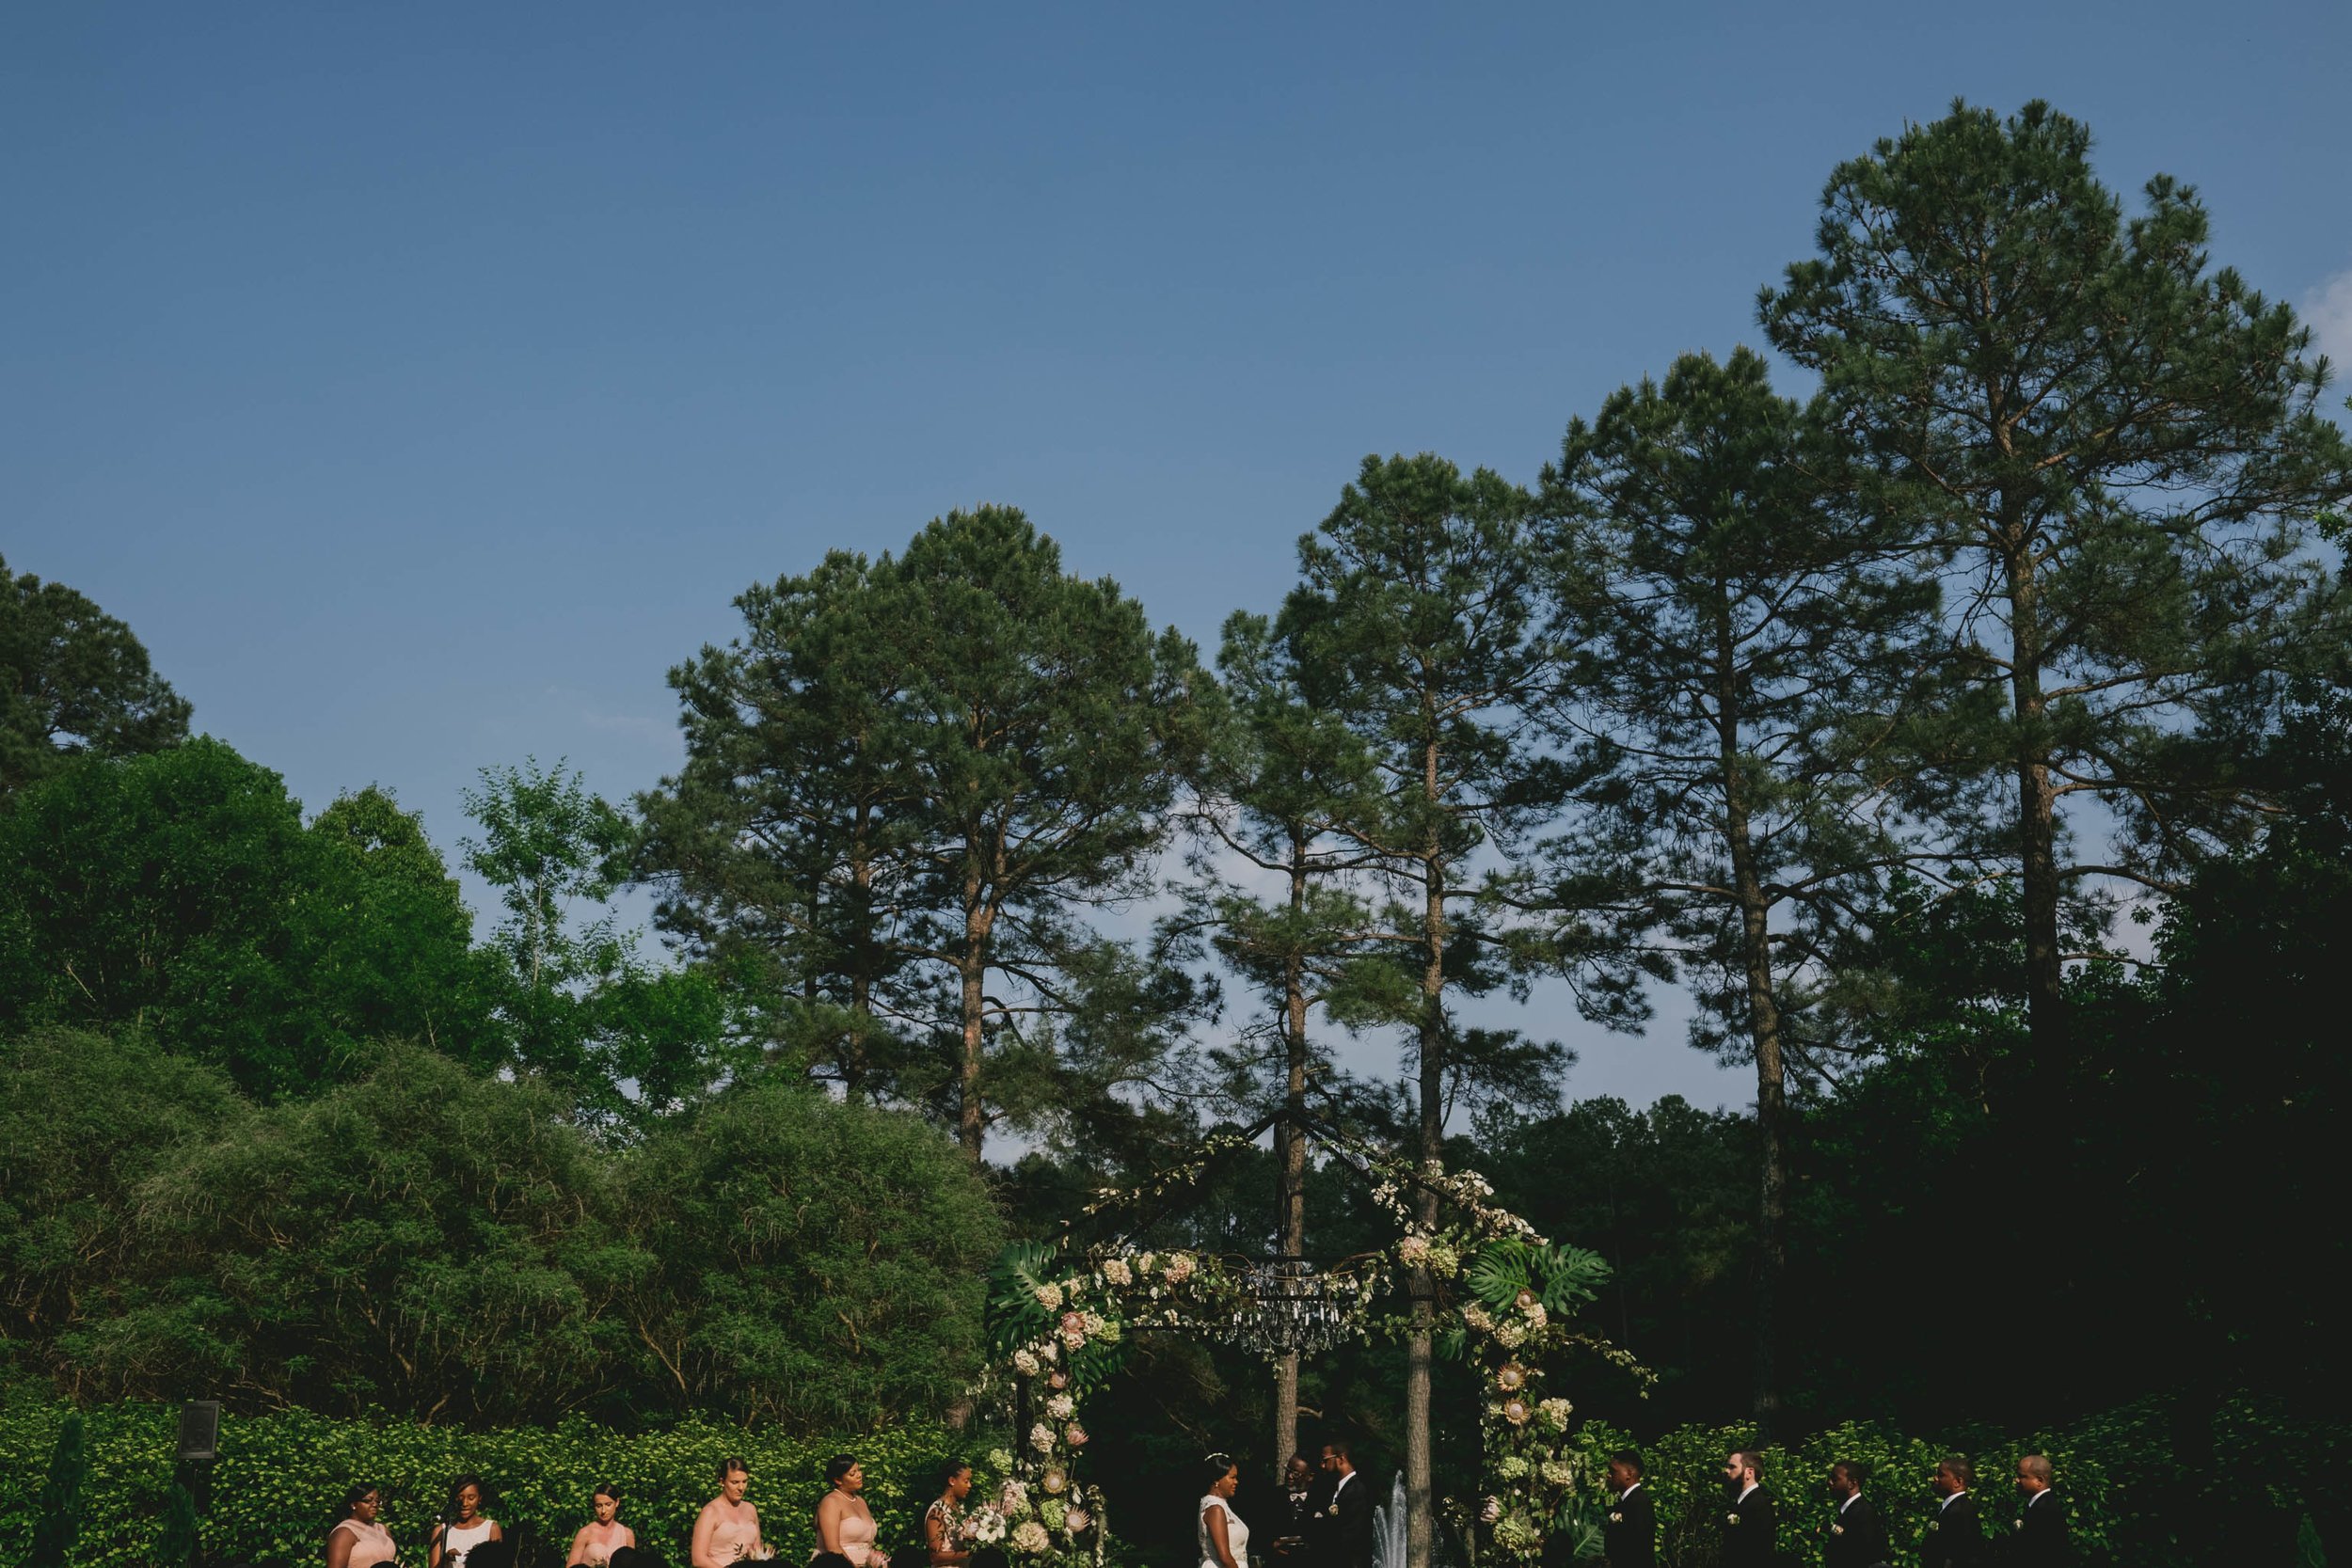 The wedding party preparing for the recessional at this Umstead Hotel wedding